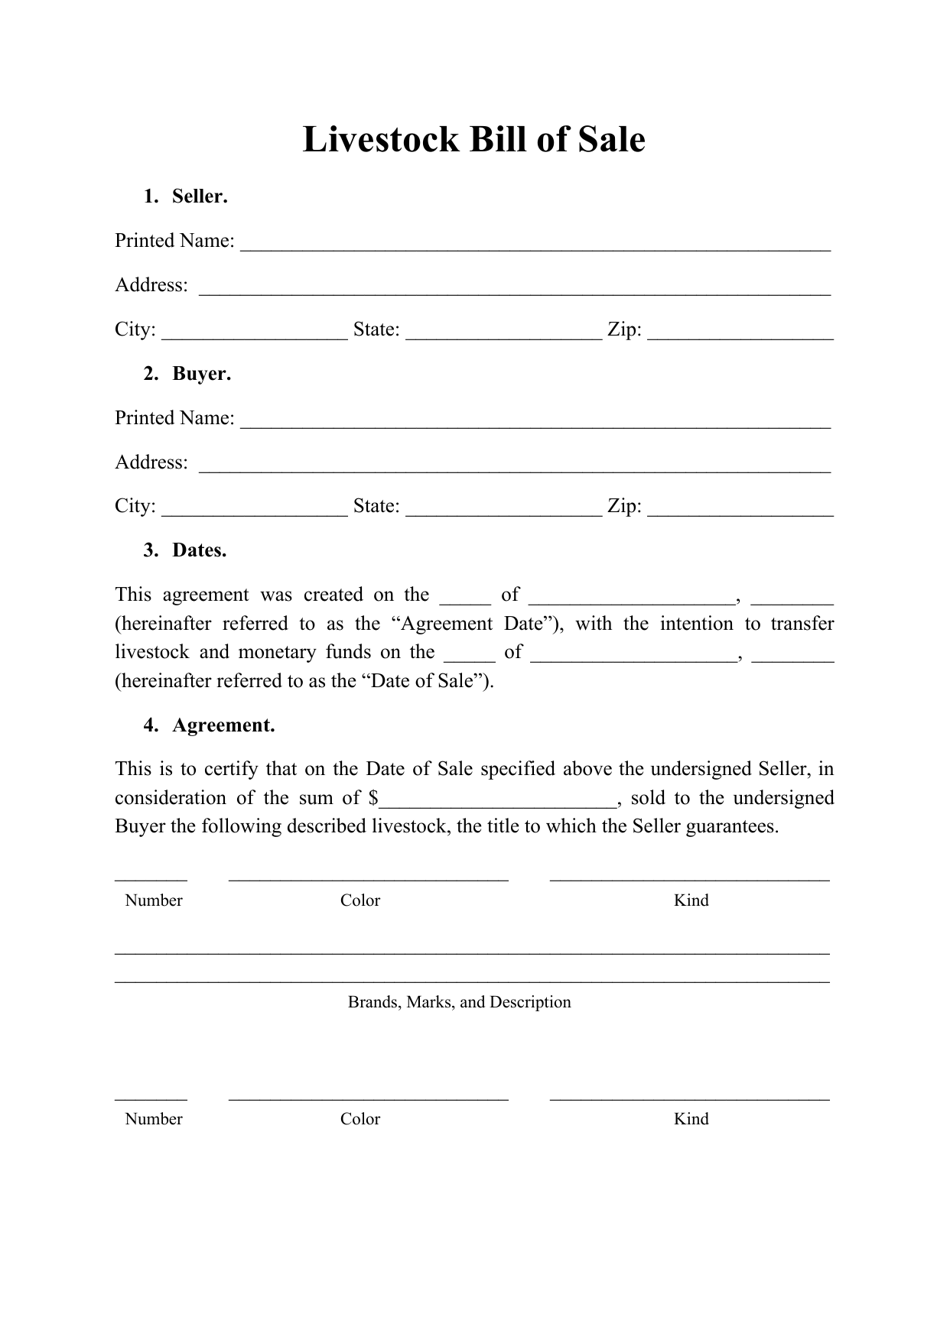 Livestock Bill of Sale Form, Page 1